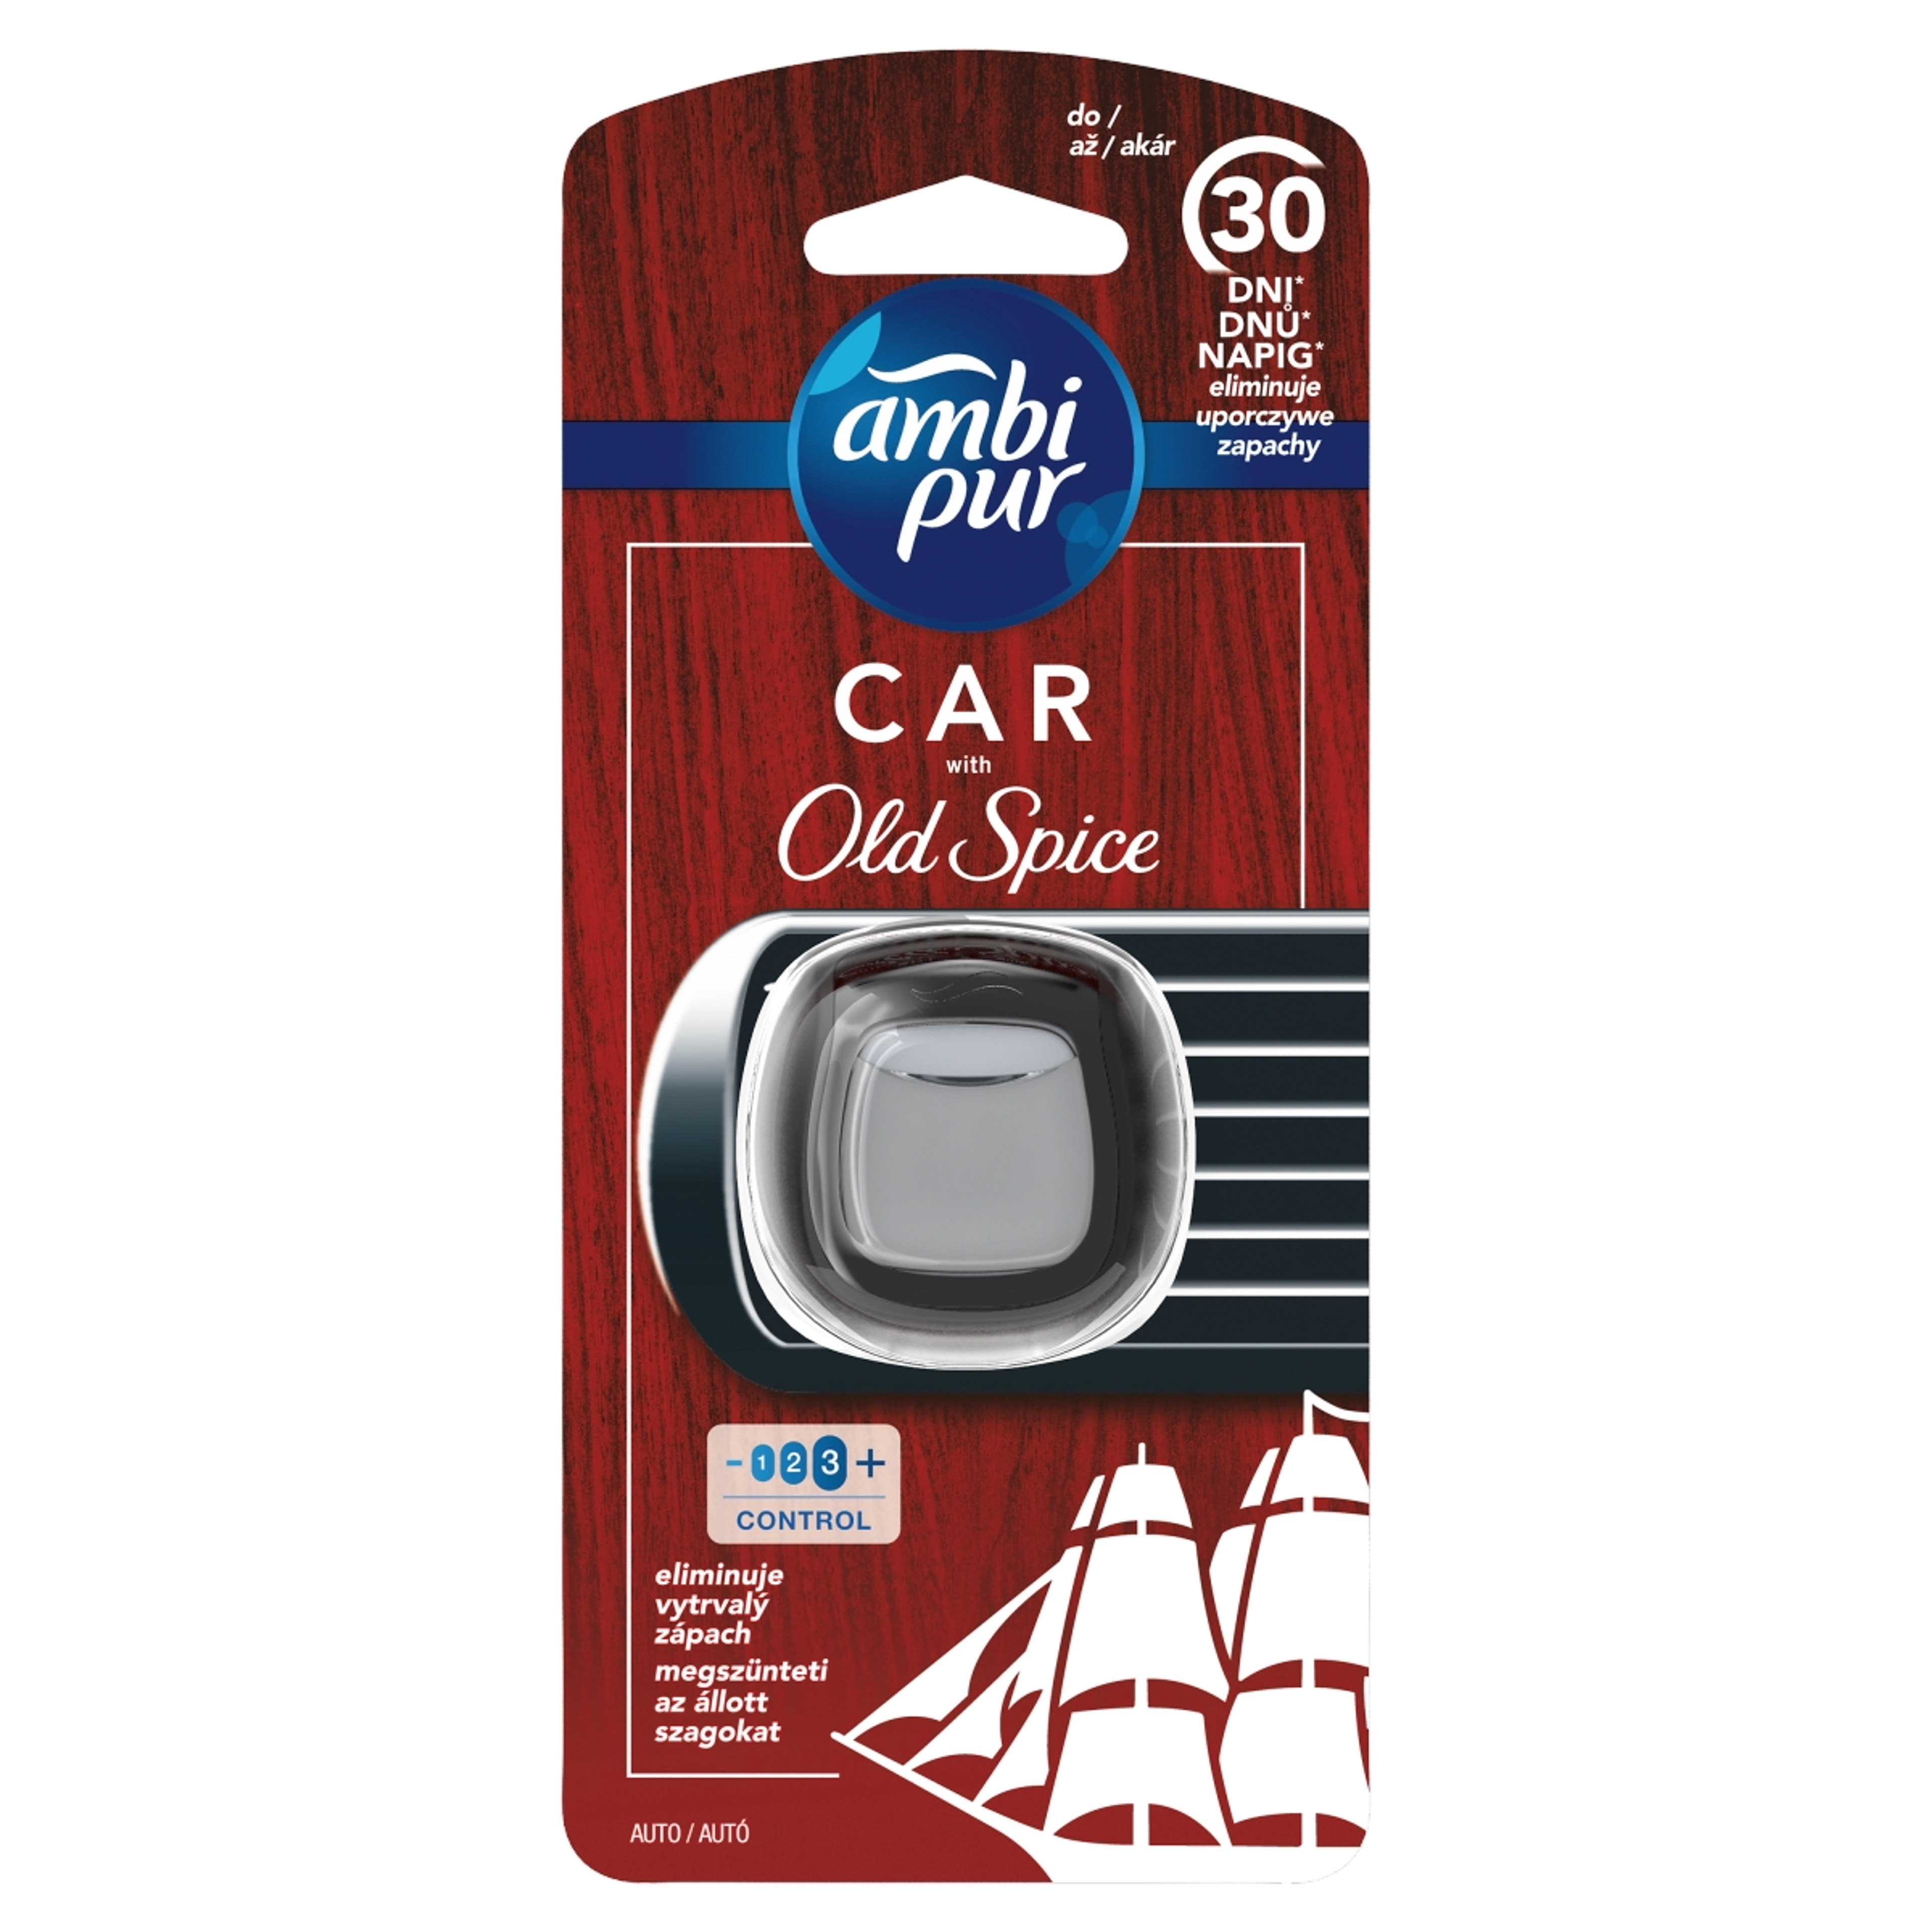 Ambi pur car old spice - 2 ml